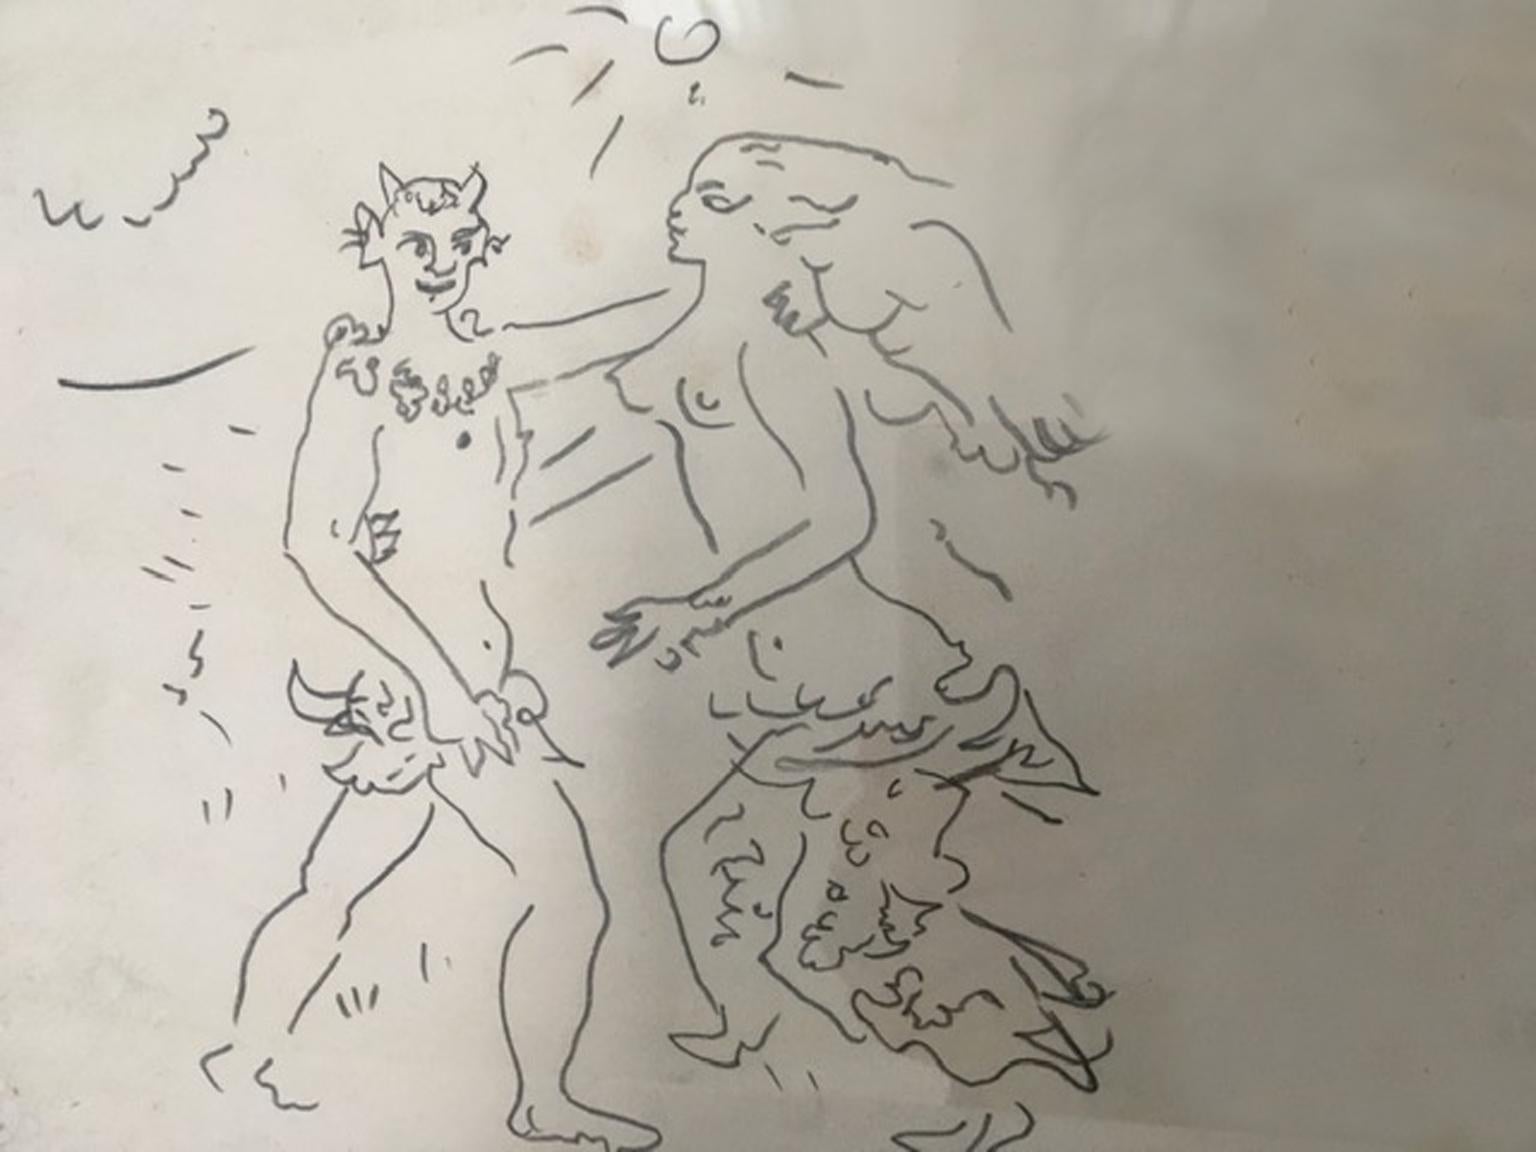 1980 Fauno e Ninfa Faun and Nymph Pencil on Paper Figurative Drawing - Art by Jean 52 